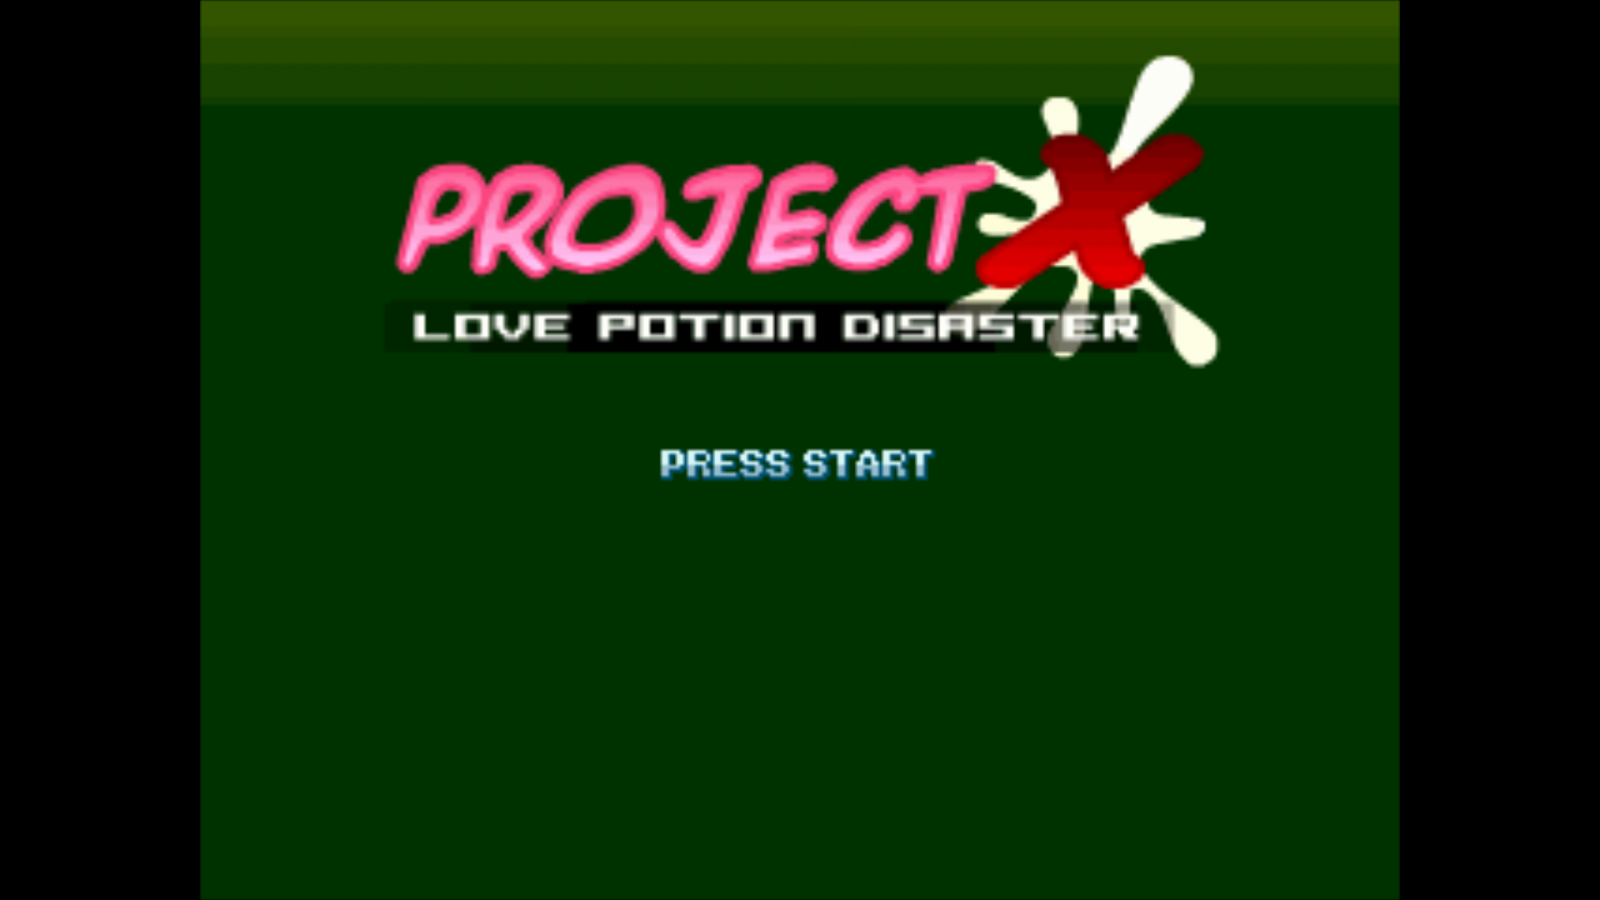 project x love potion disaster game free play